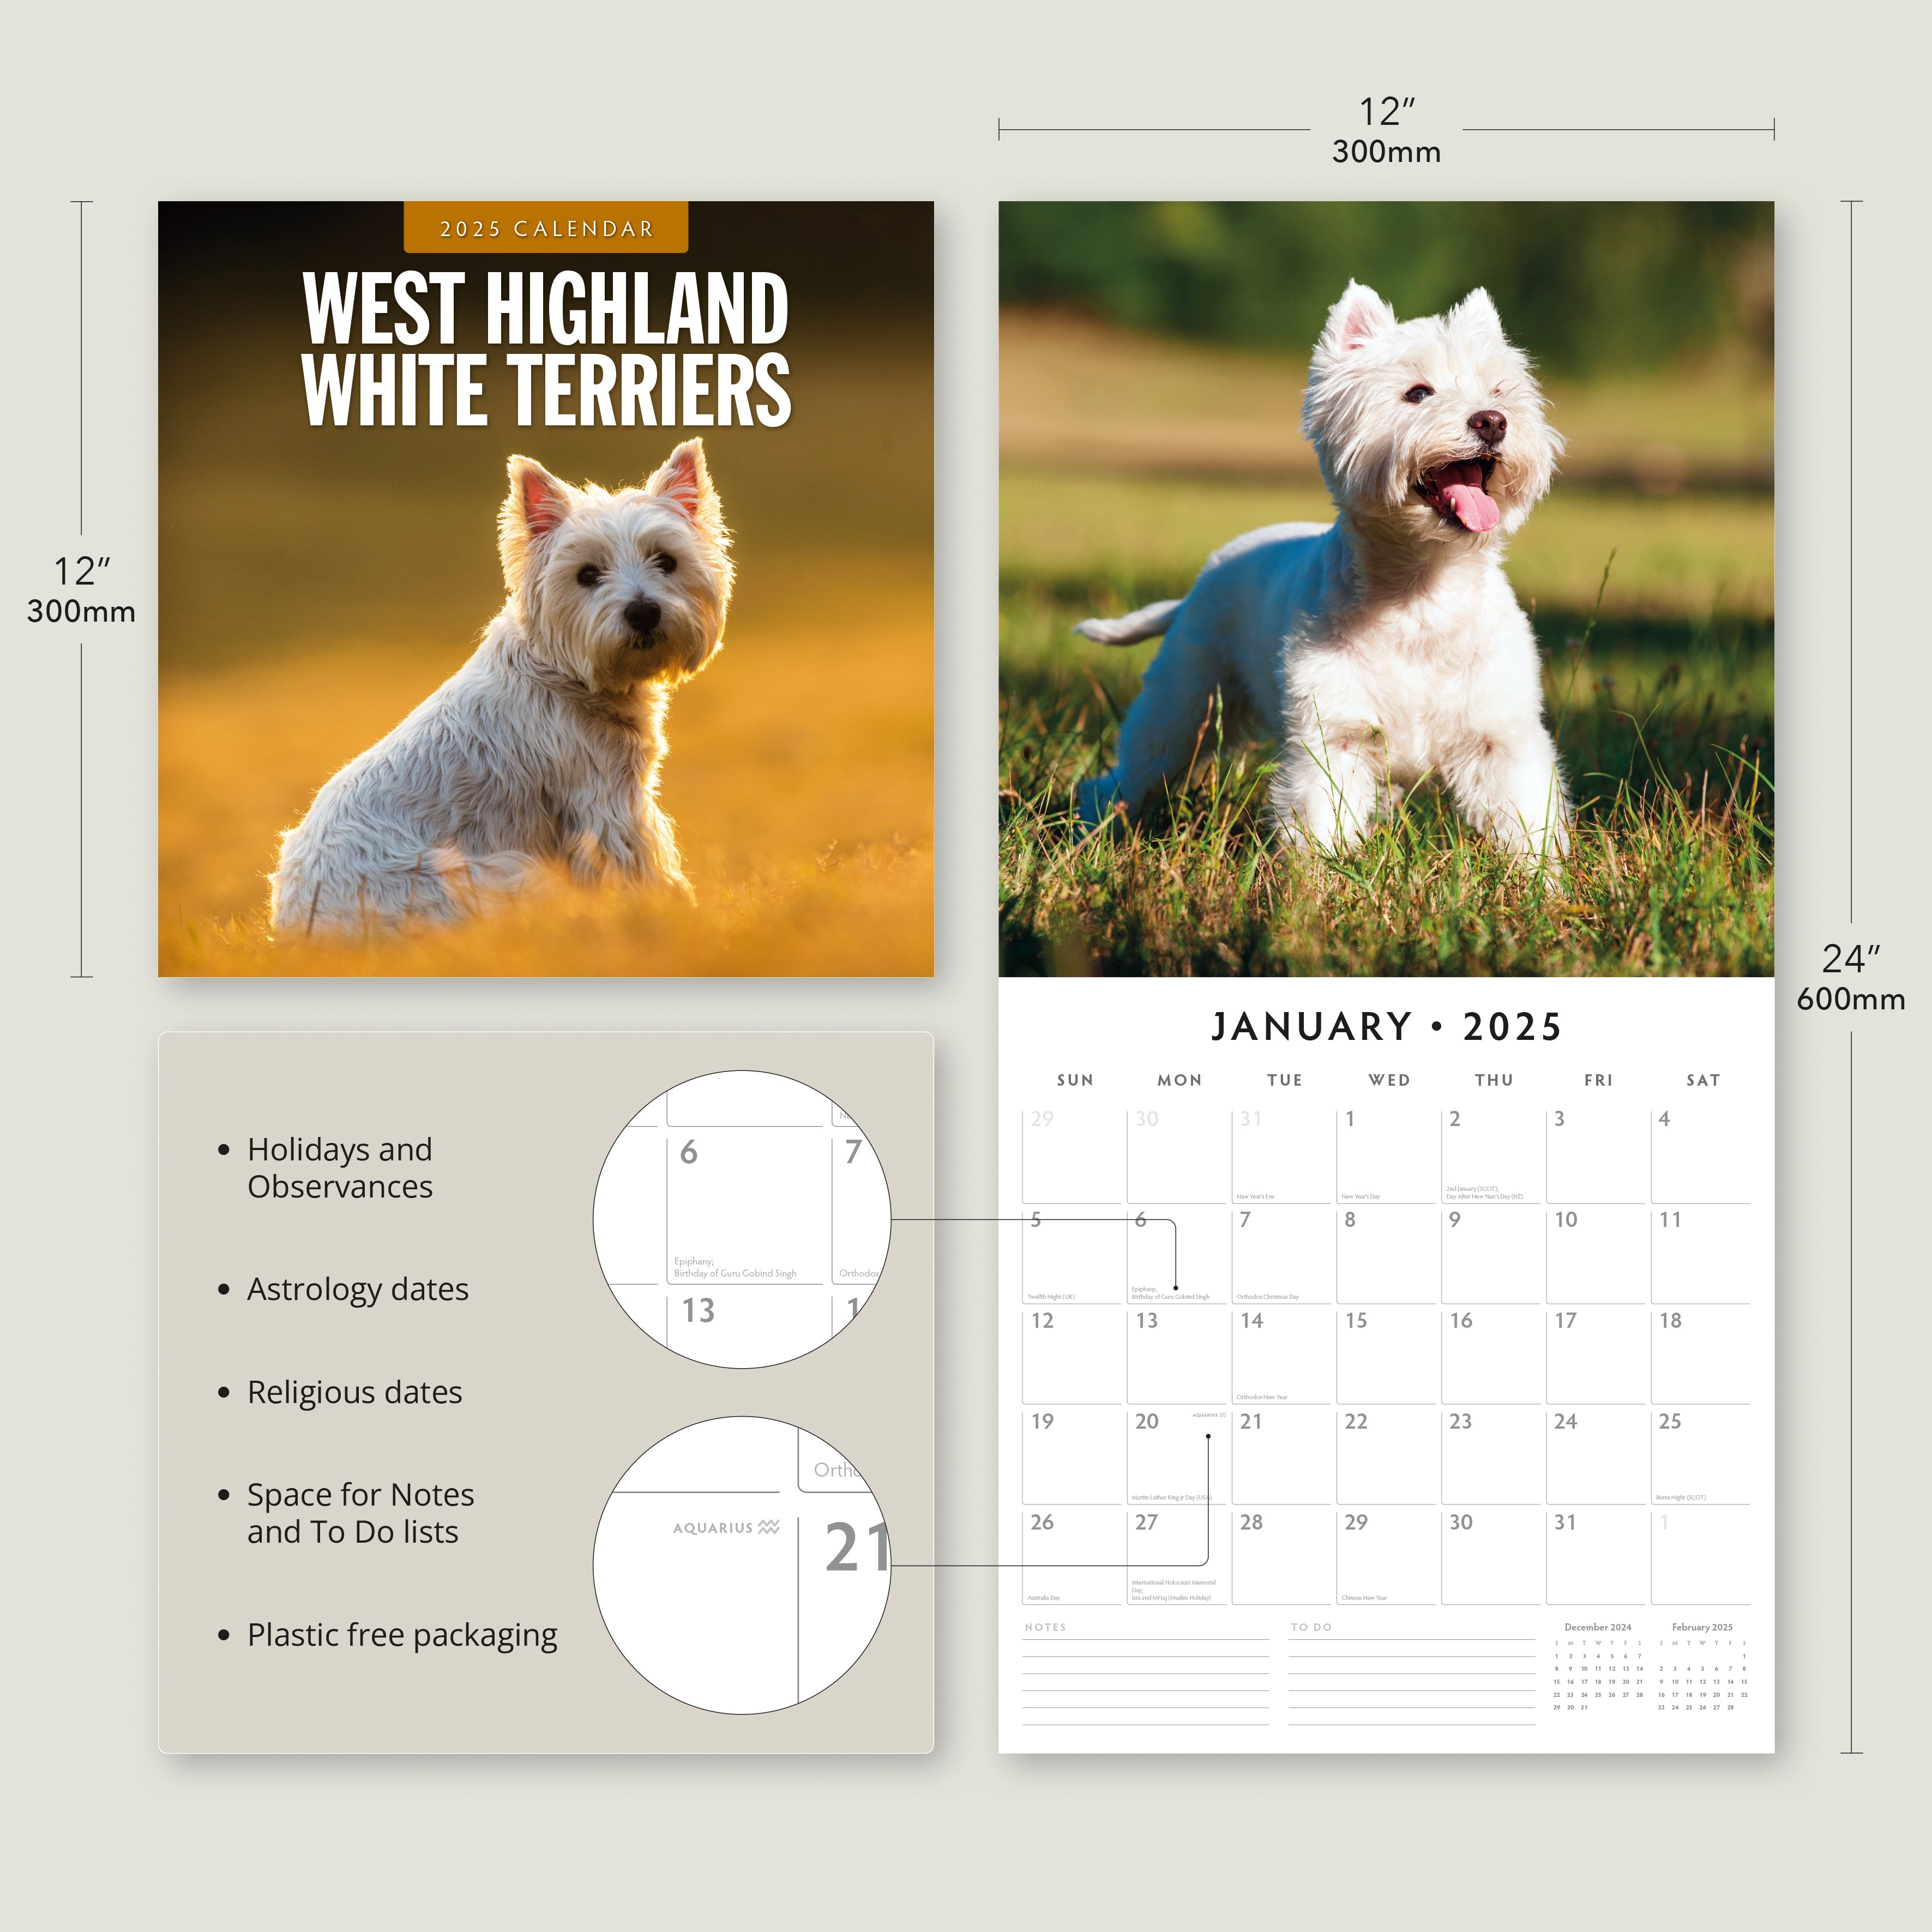 2025 West Highland White Terriers (Westies) - Square Wall Calendar